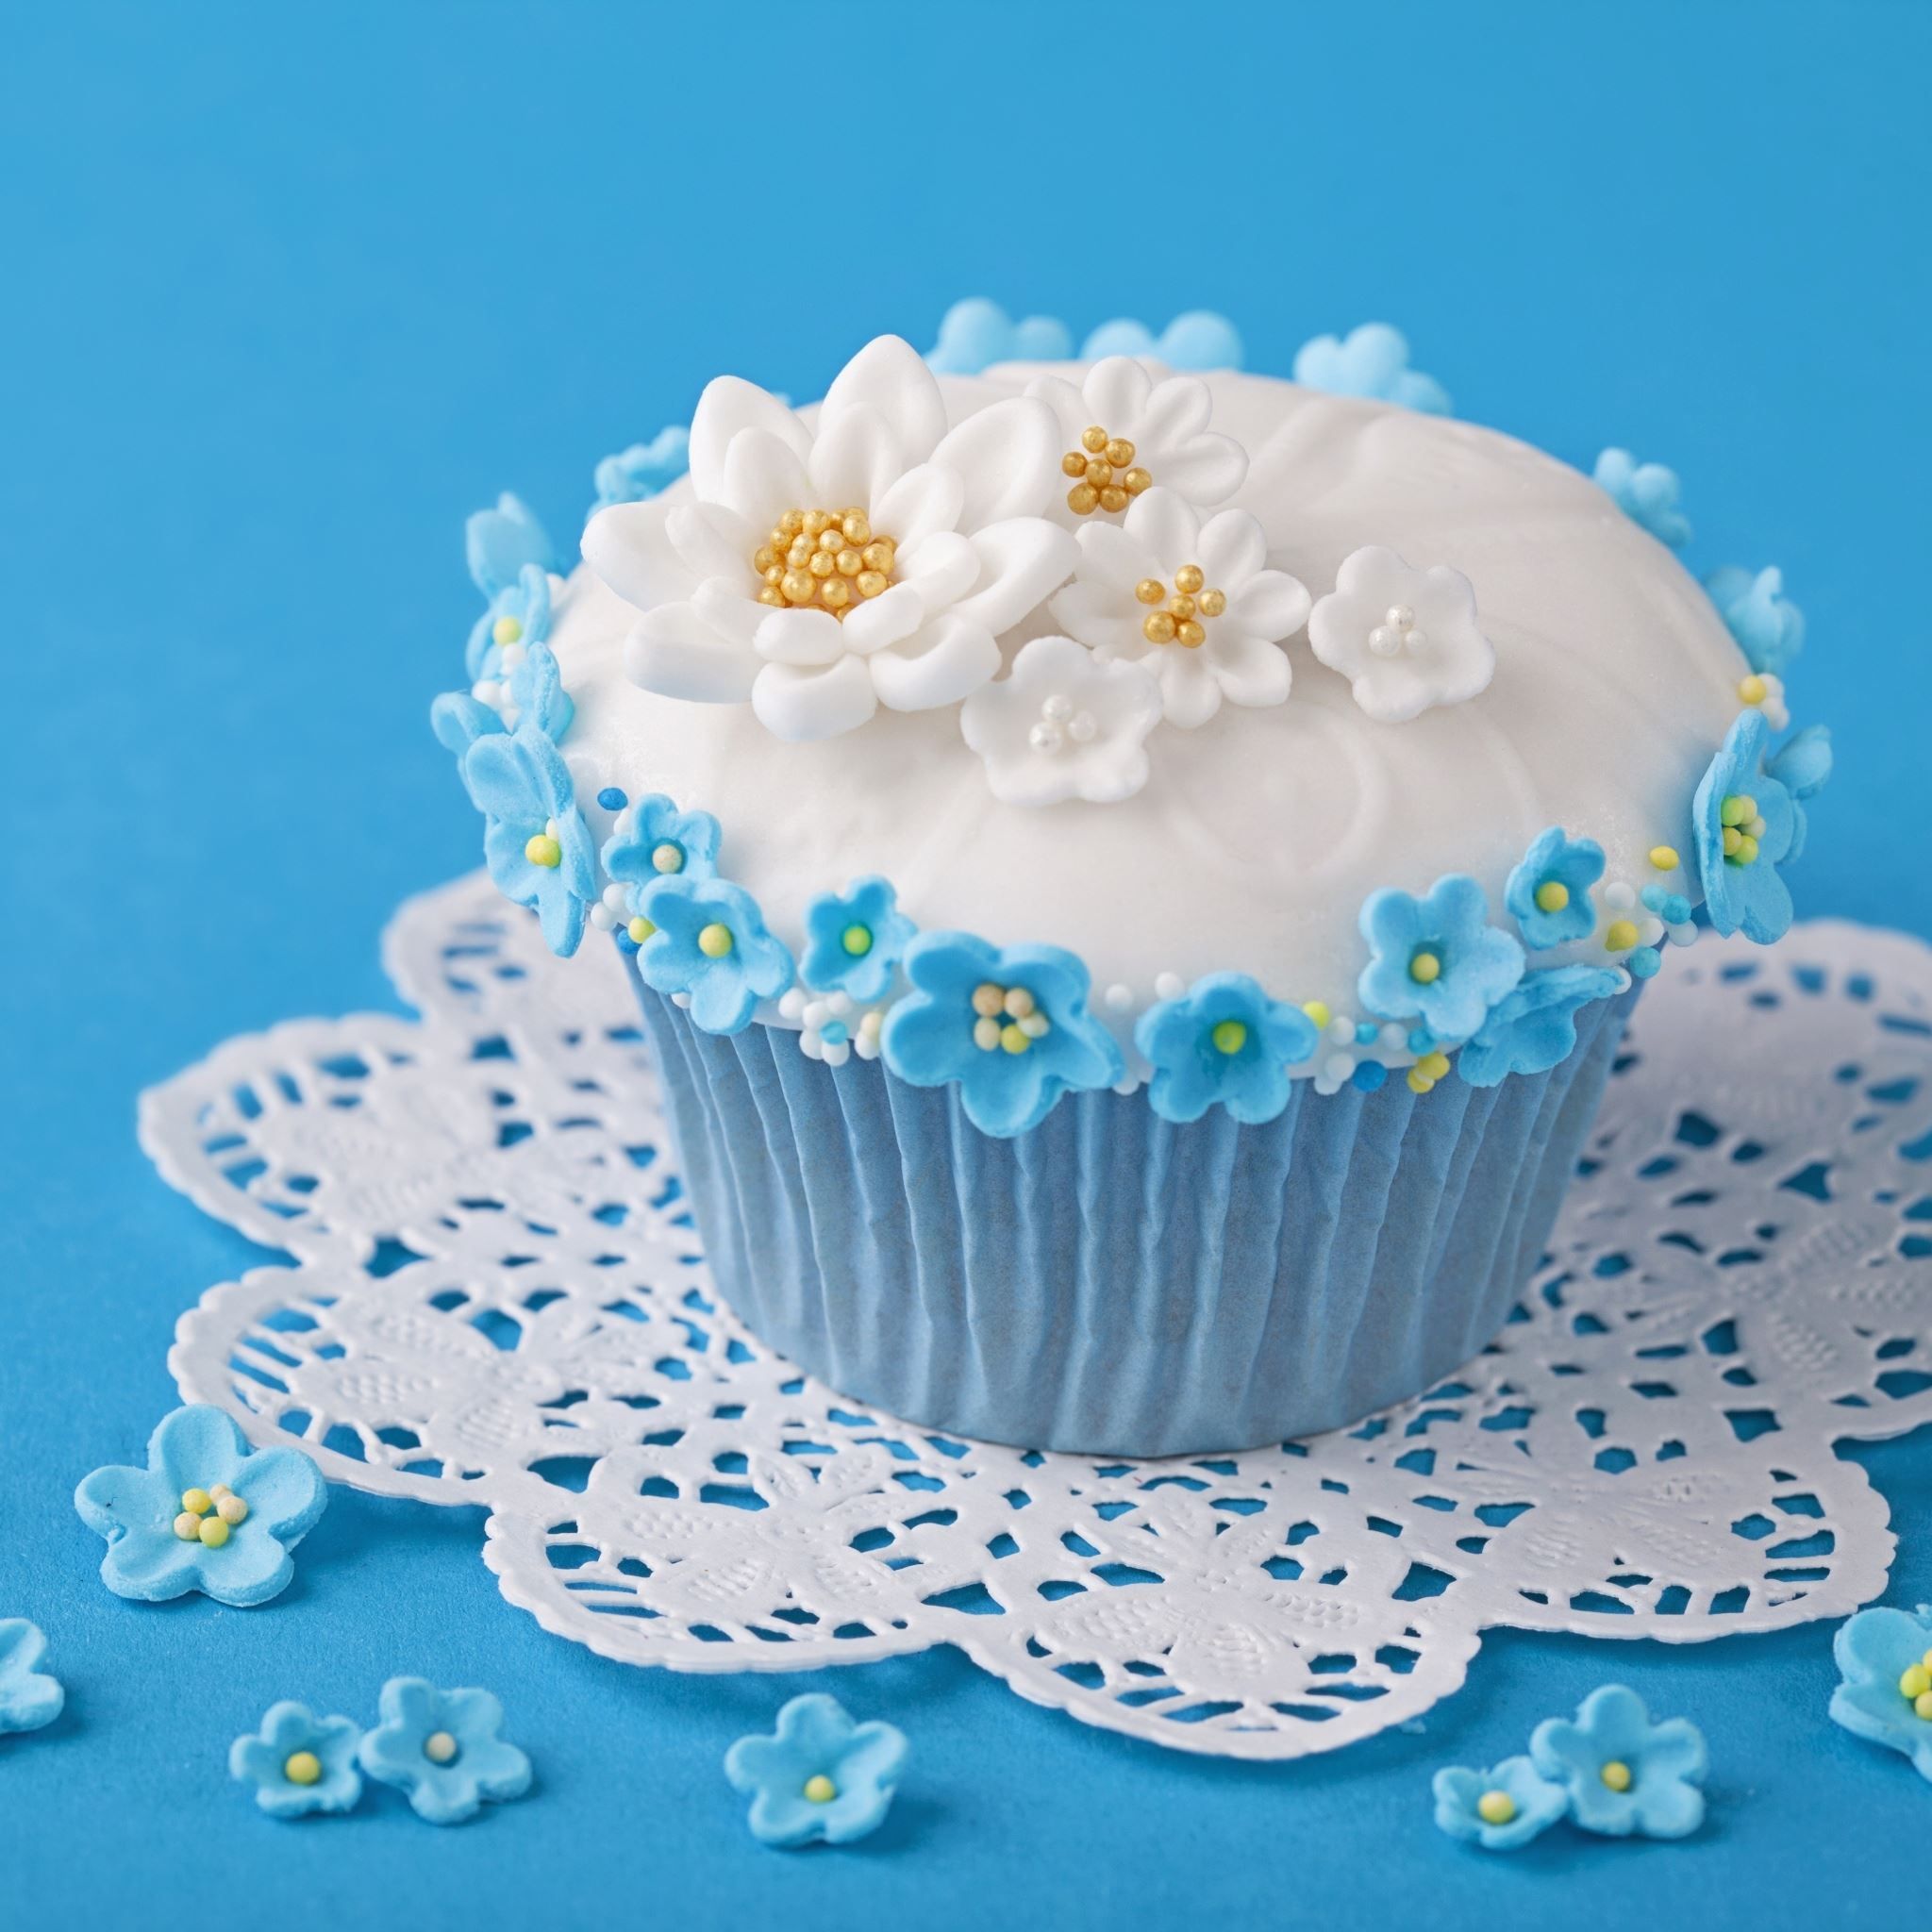 A cupcake with white frosting and blue flowers on a blue background. - Cupcakes